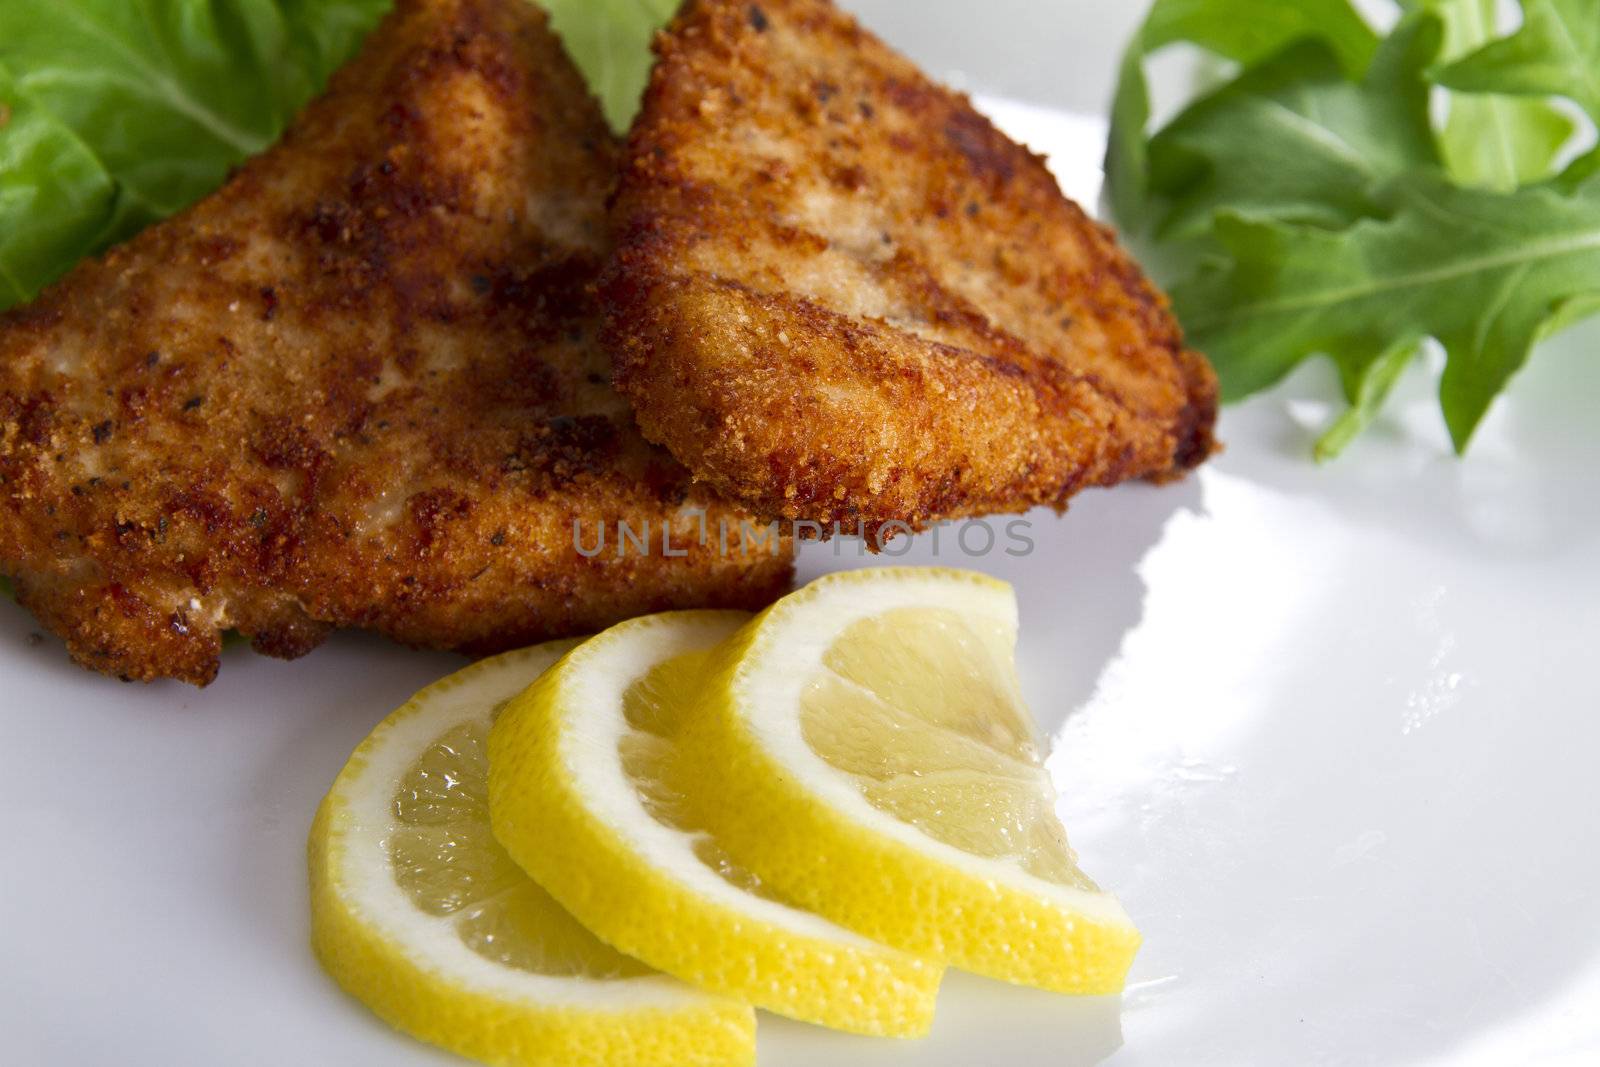 Breaded meat with lemon and salad by caldix